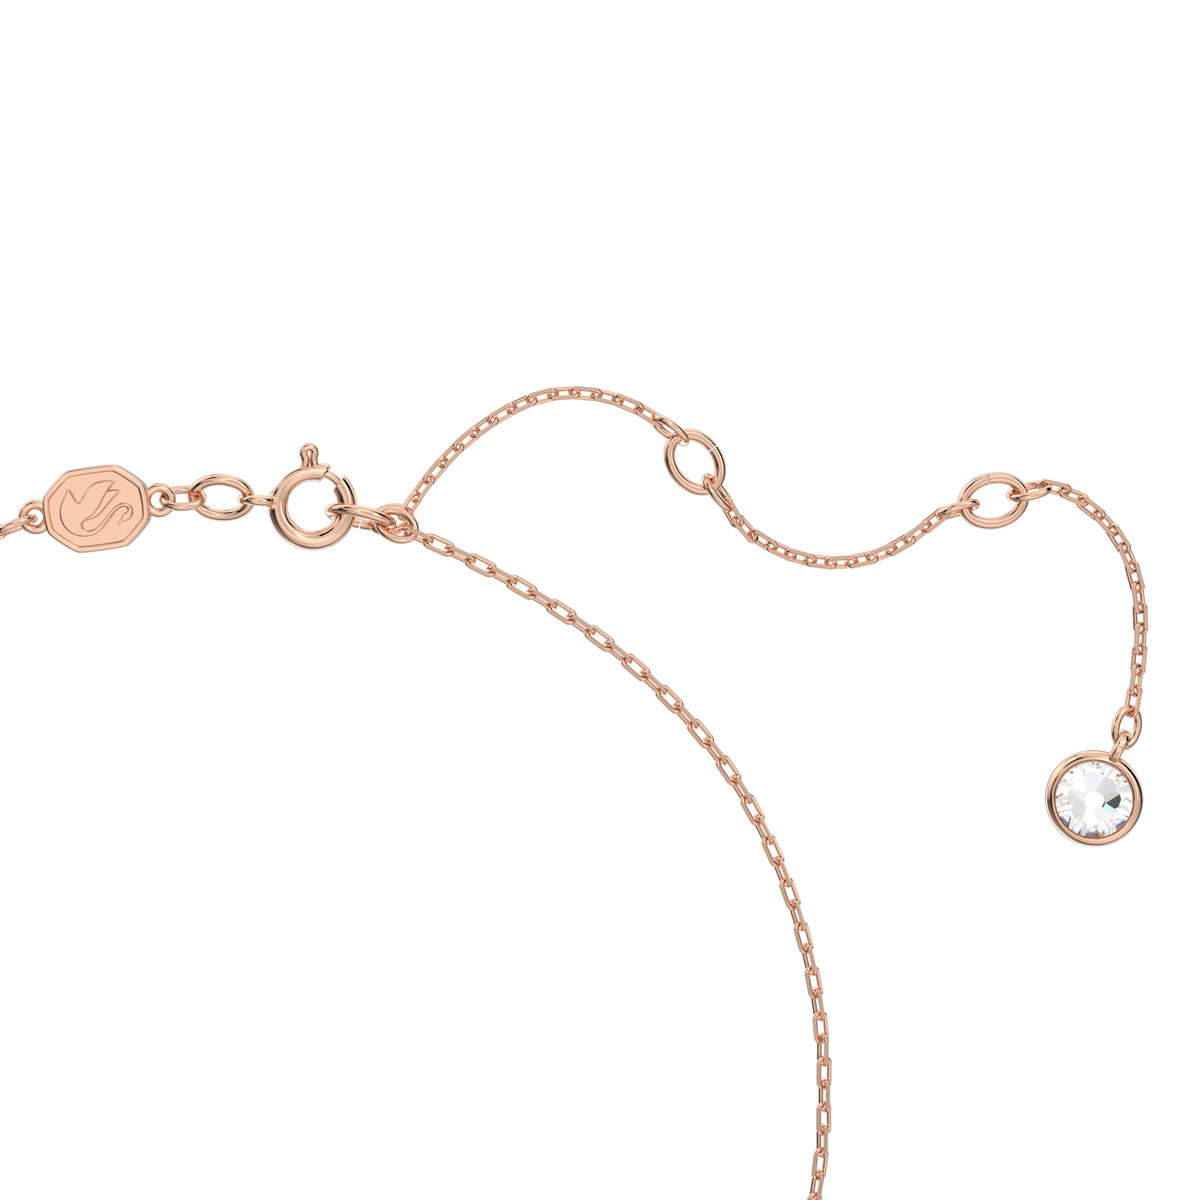 Swarovski Crystal and Pearls Star Rose Gold Stella Necklace